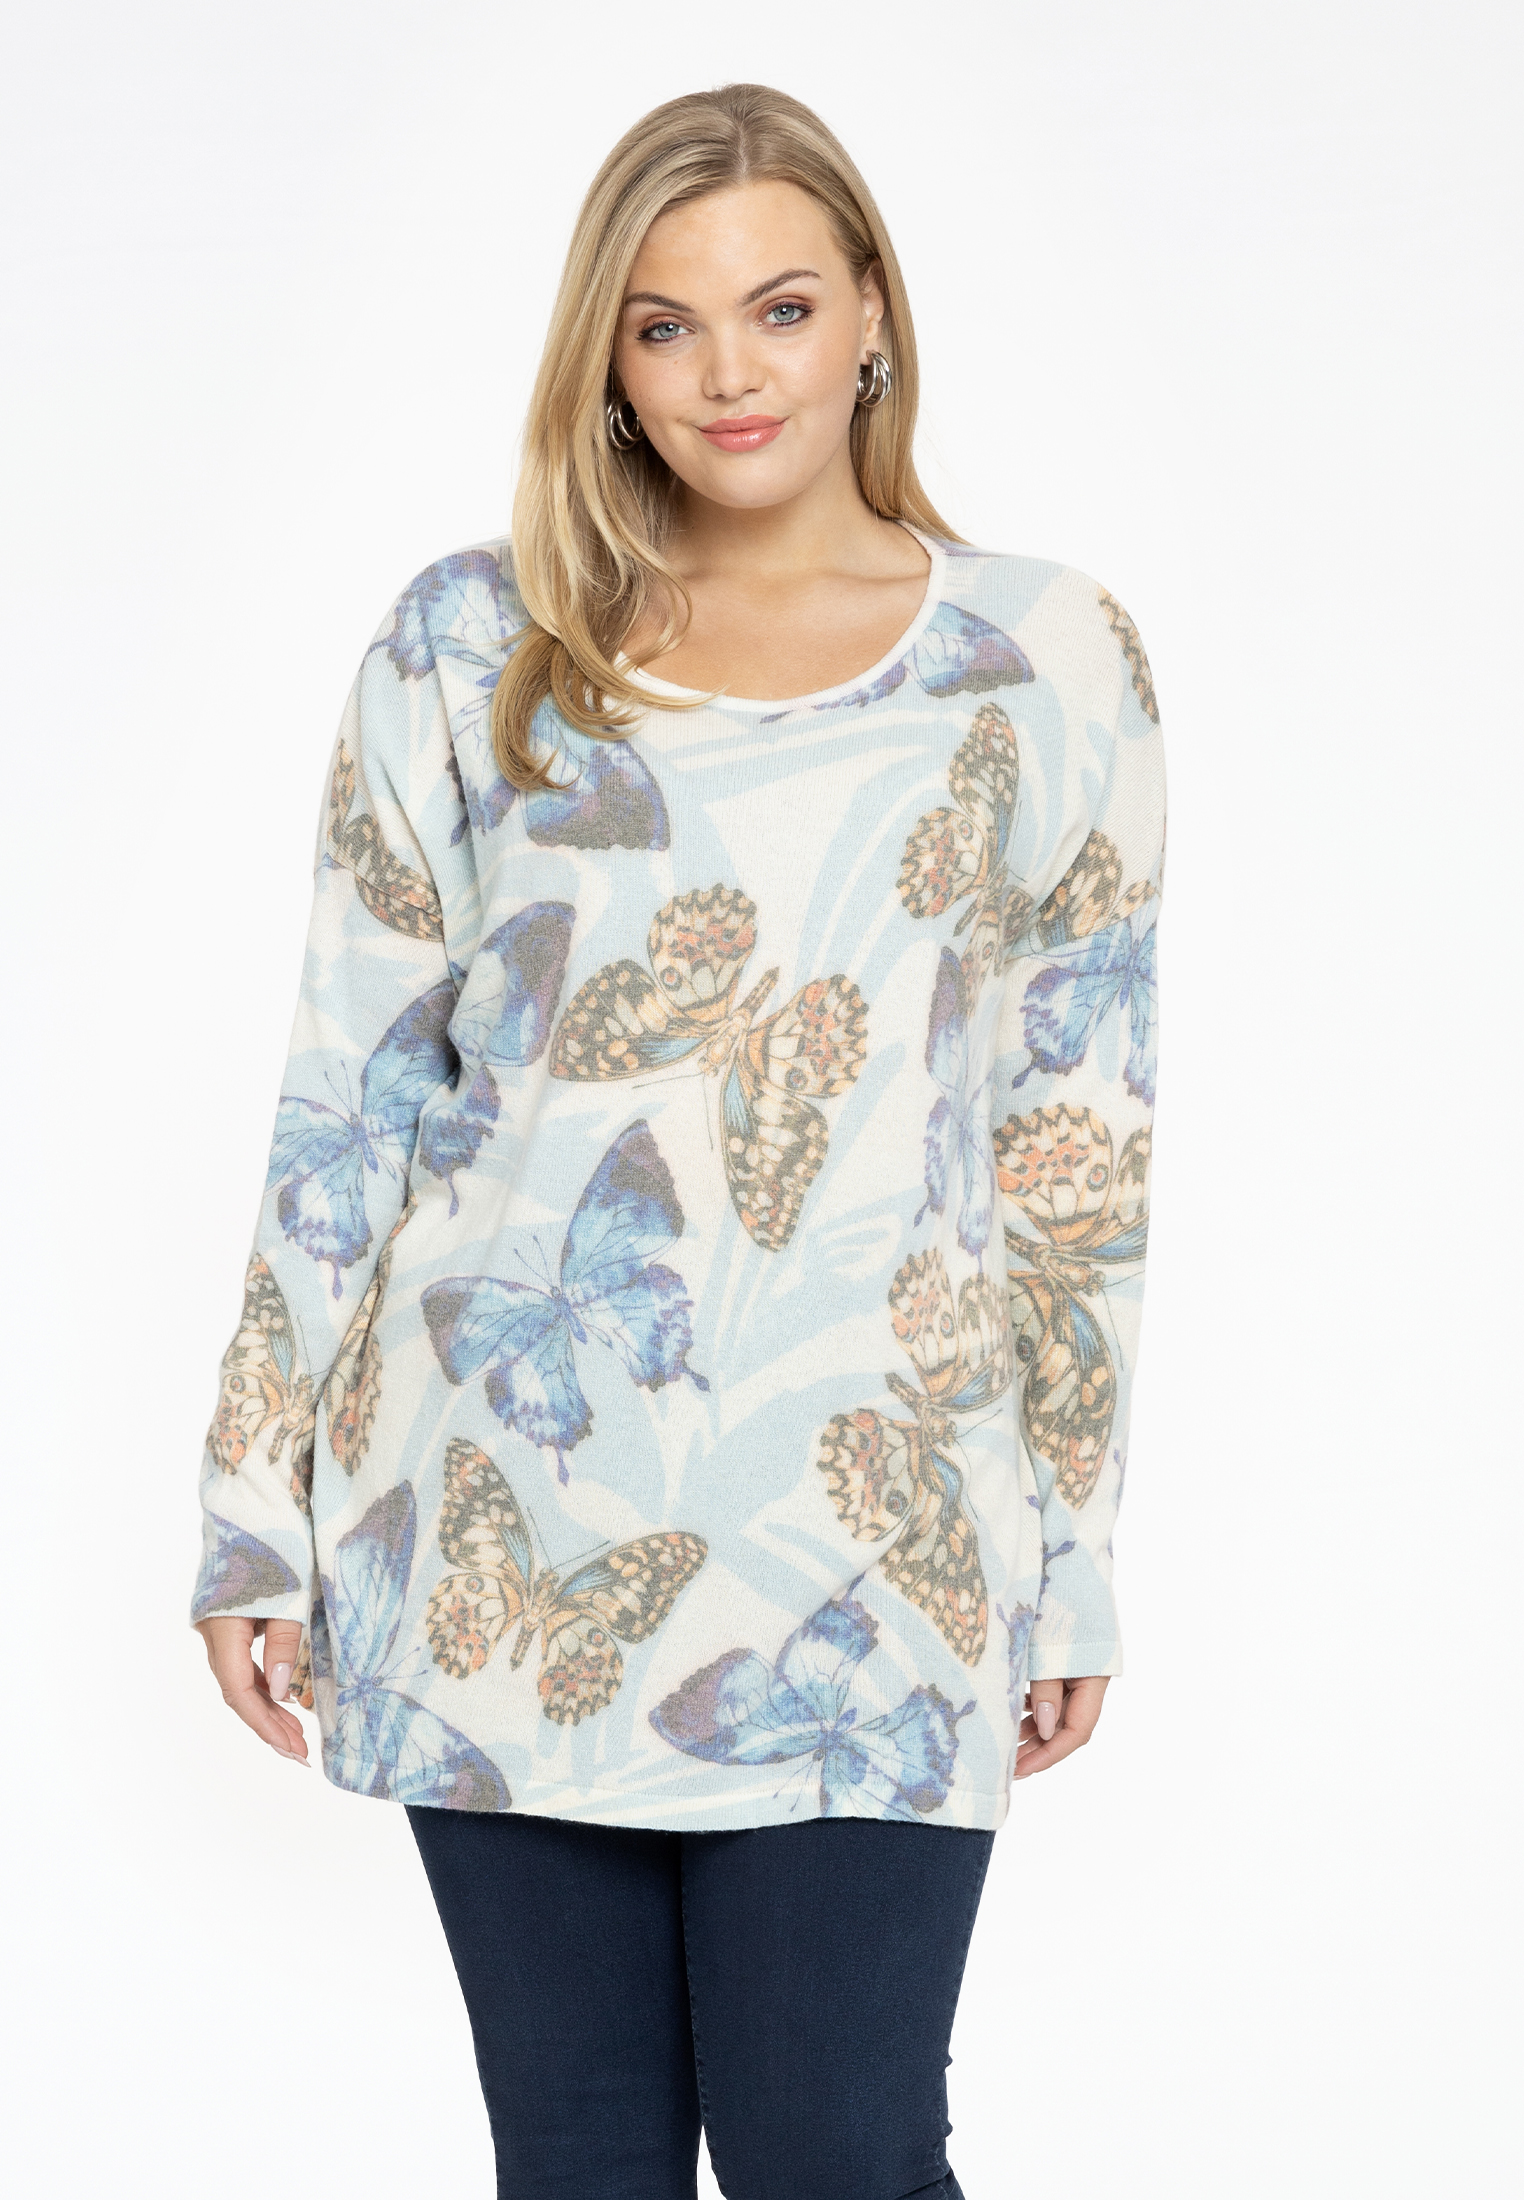 Pullover square BUTTERFLY 42/44 white